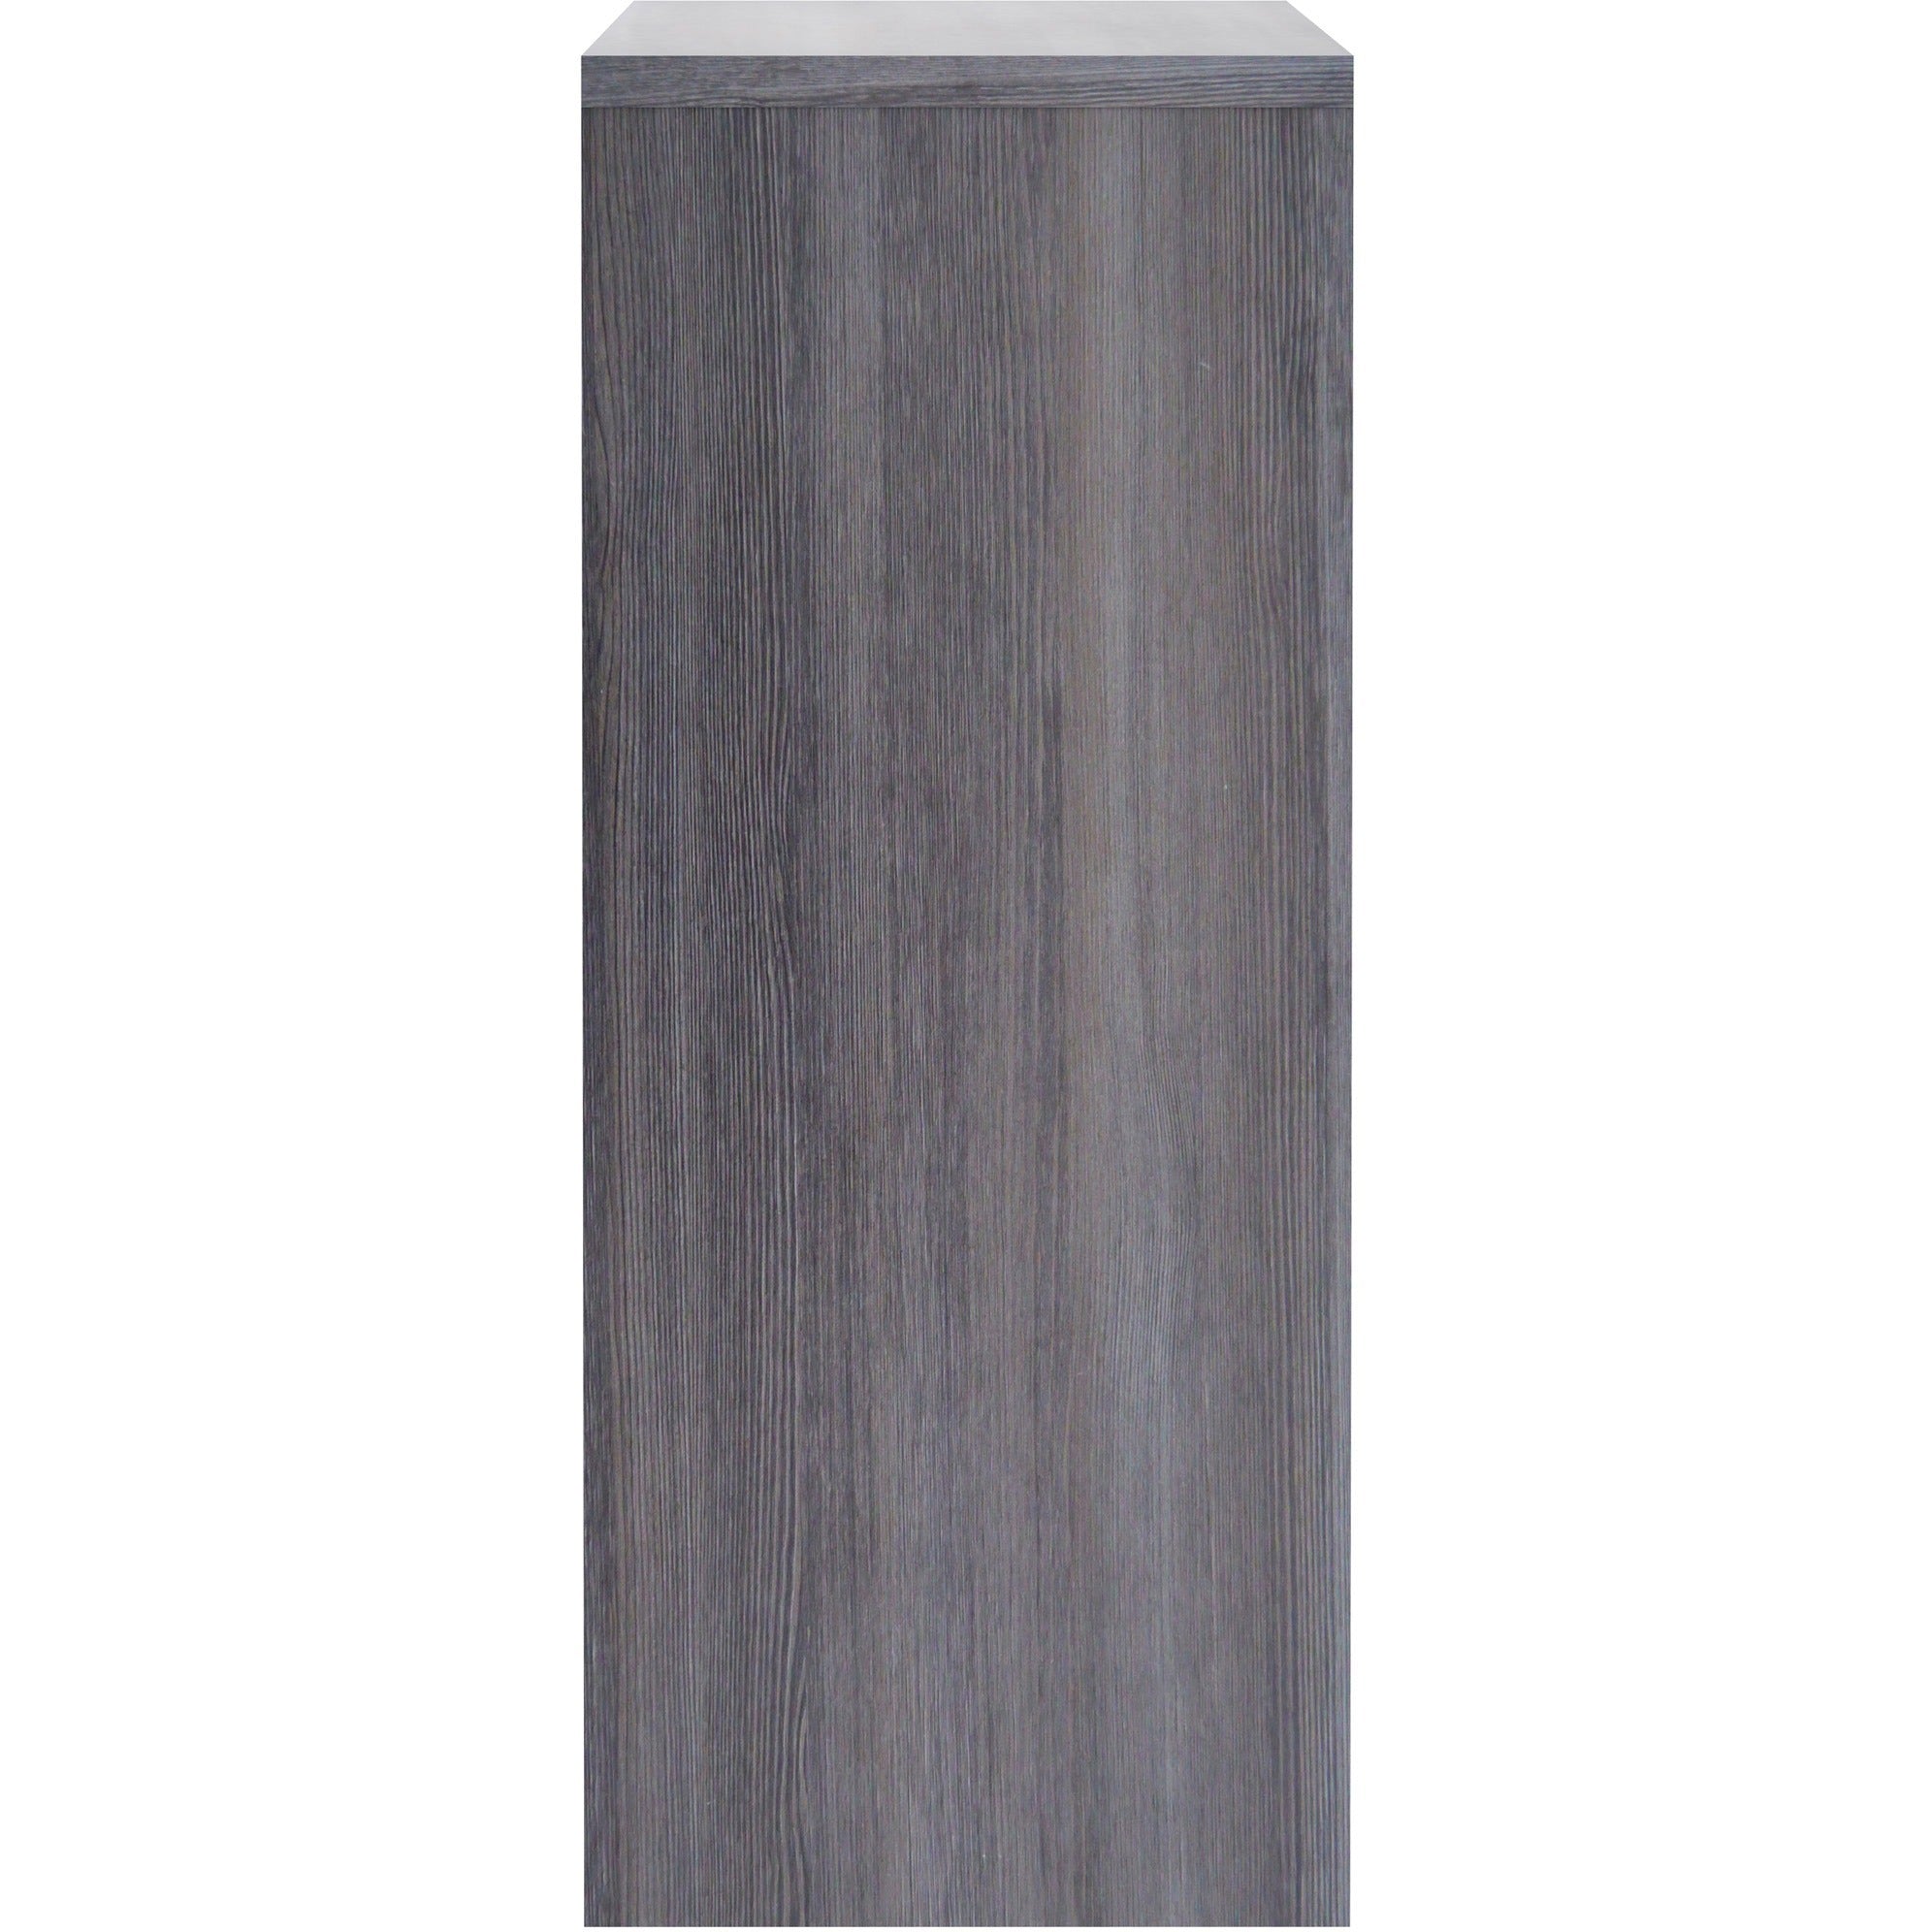 lorell-essentials-series-stack-on-hutch-with-doors-60-x-1536-4-doors-finish-weathered-charcoal-laminate_llr69620 - 4